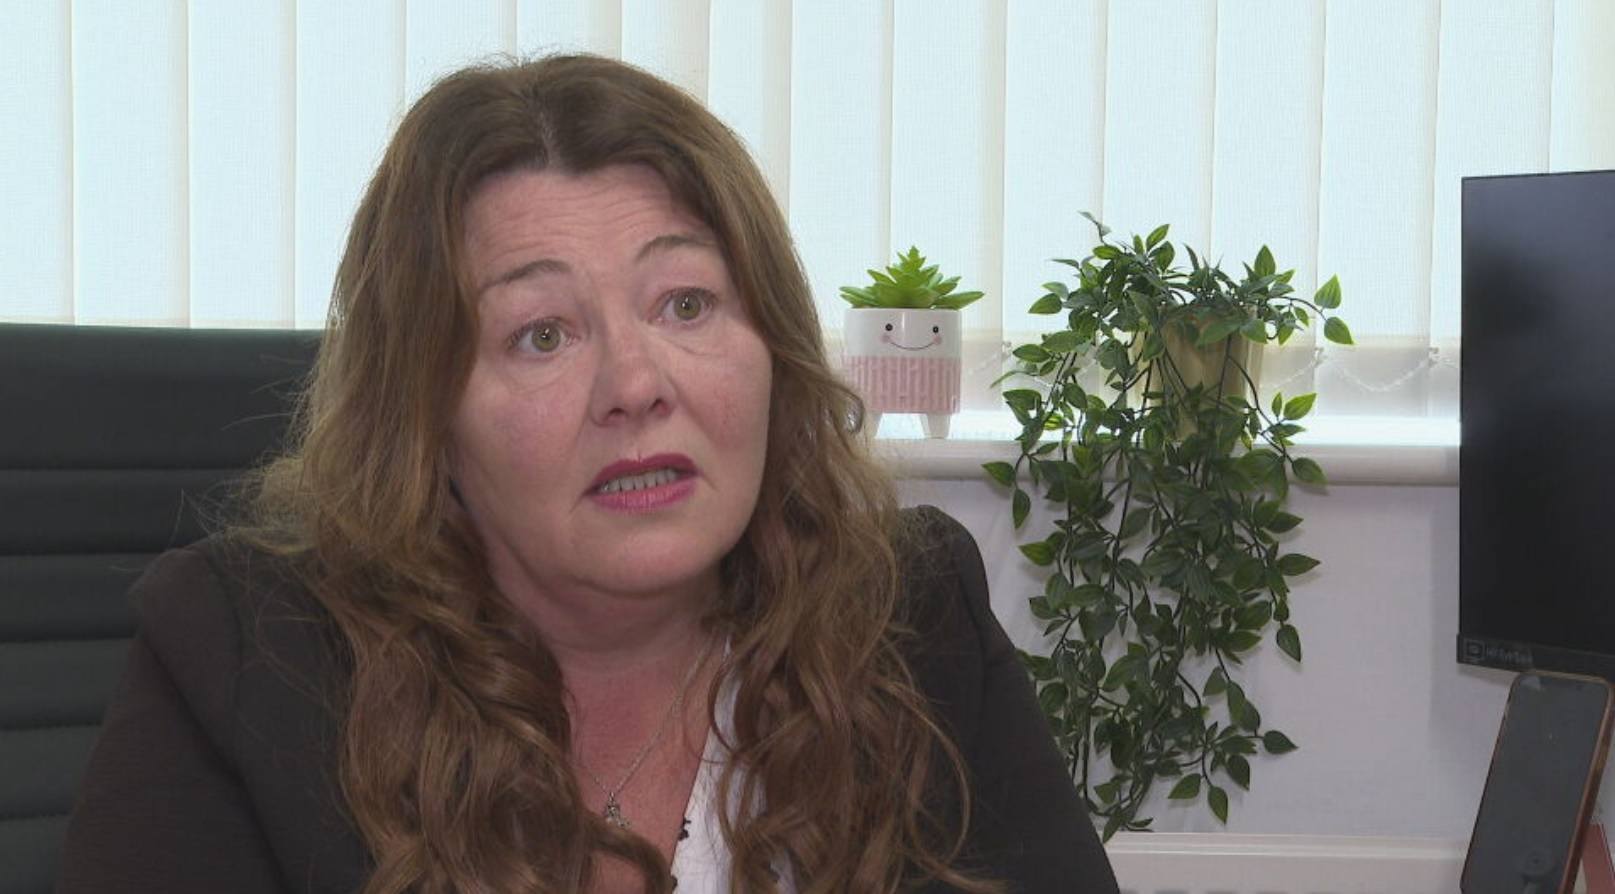 Head of business Samantha Thompson said recruiting nurses from overseas is not an 'overnight fix' for struggling care homes